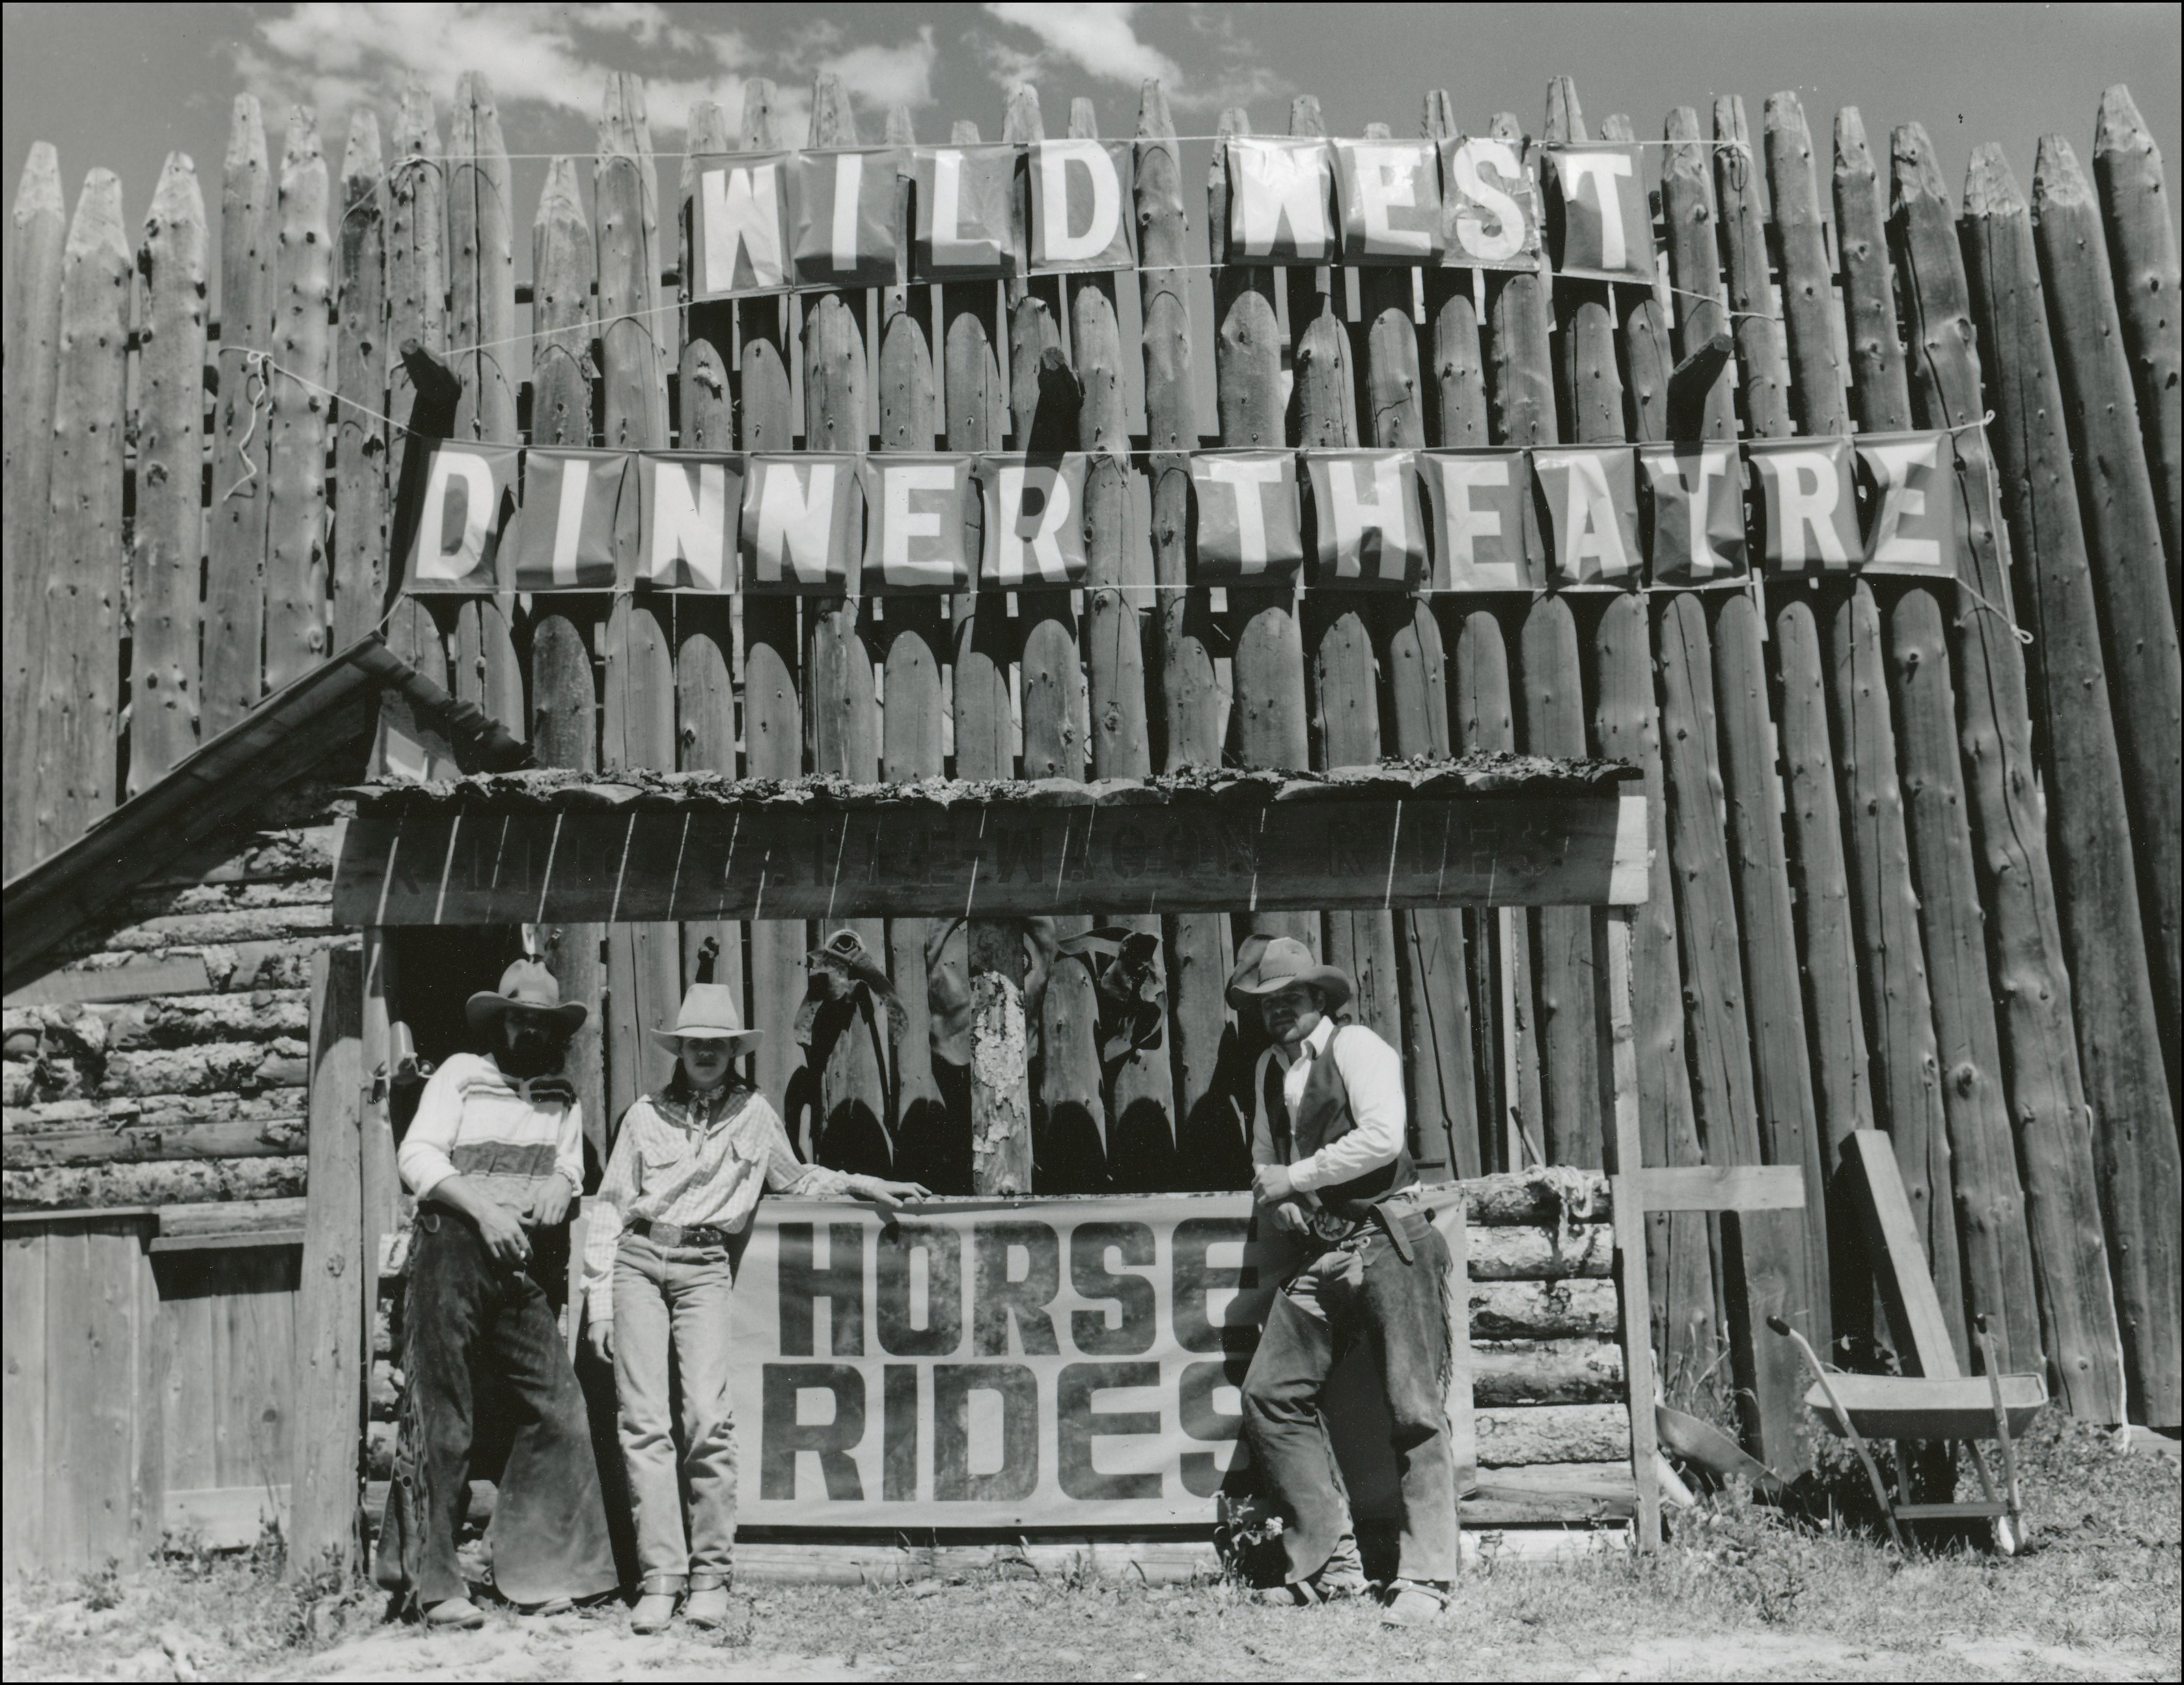 Three people in western wear standing in front of for fence with sign above that says Wild West Dinner Theatre and a booth that has a sign that says horse rides